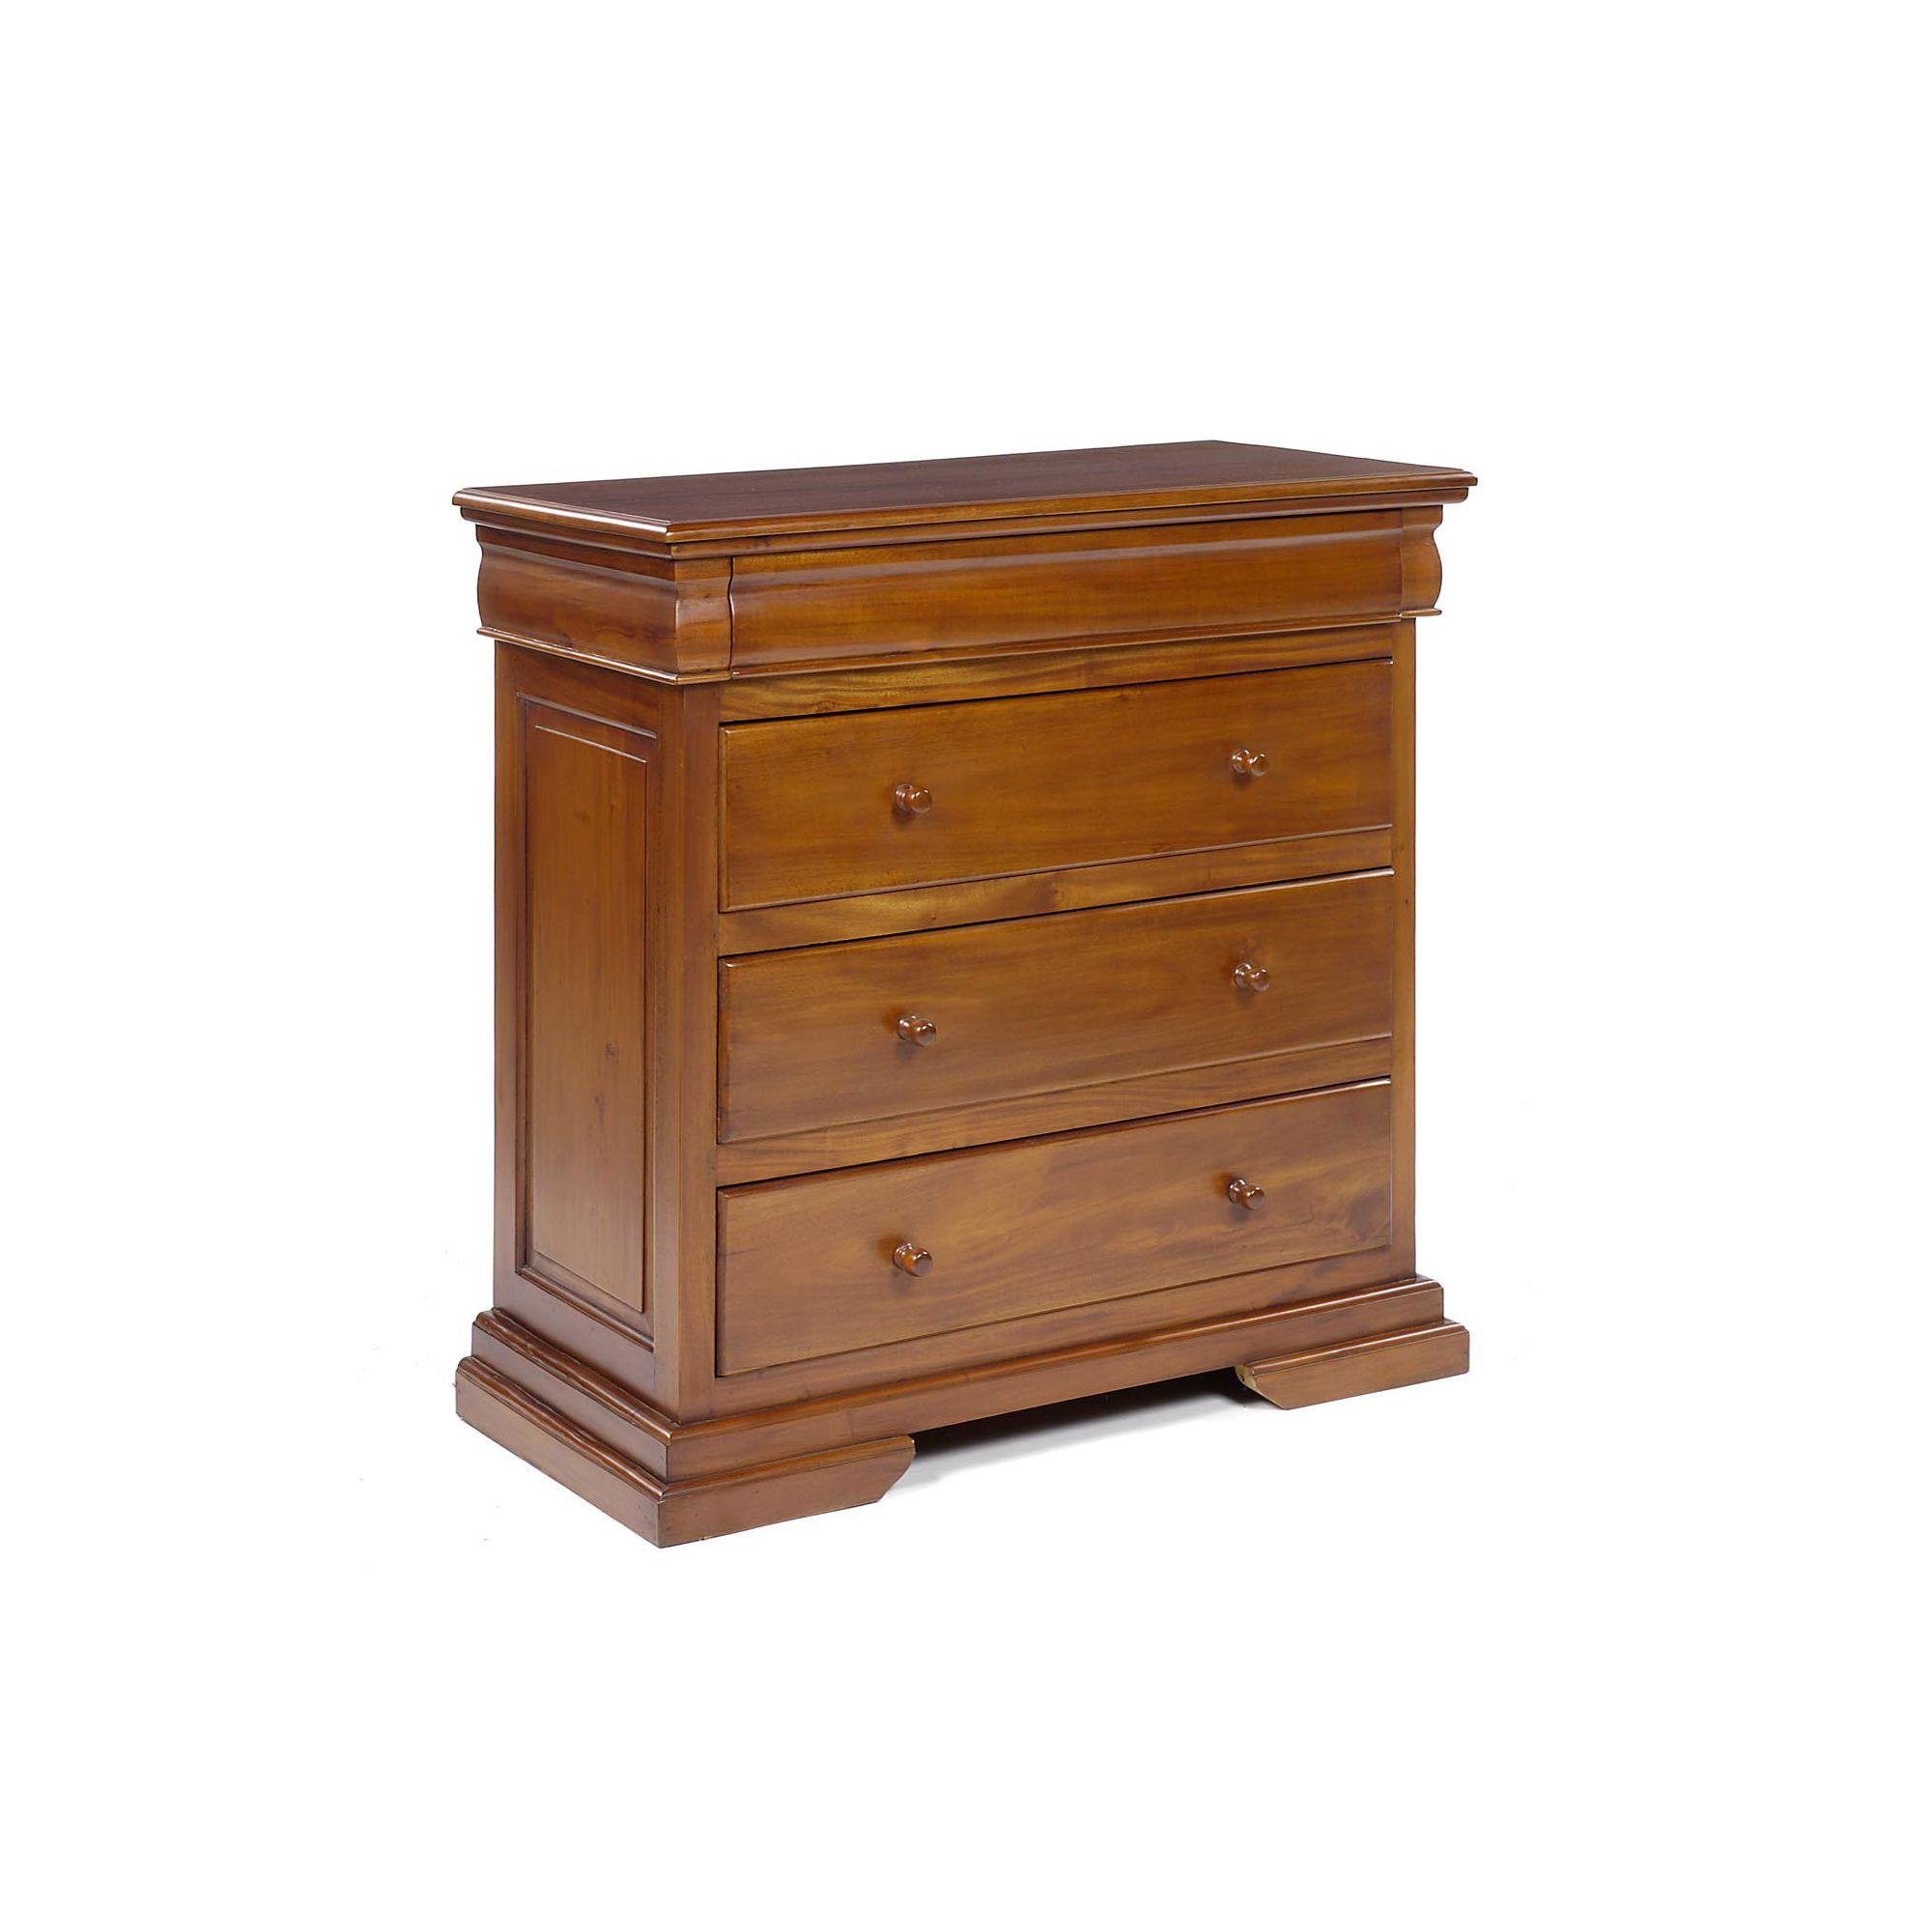 Anderson Bradshaw Colonial Four Drawer Chest in Mahogany at Tesco Direct